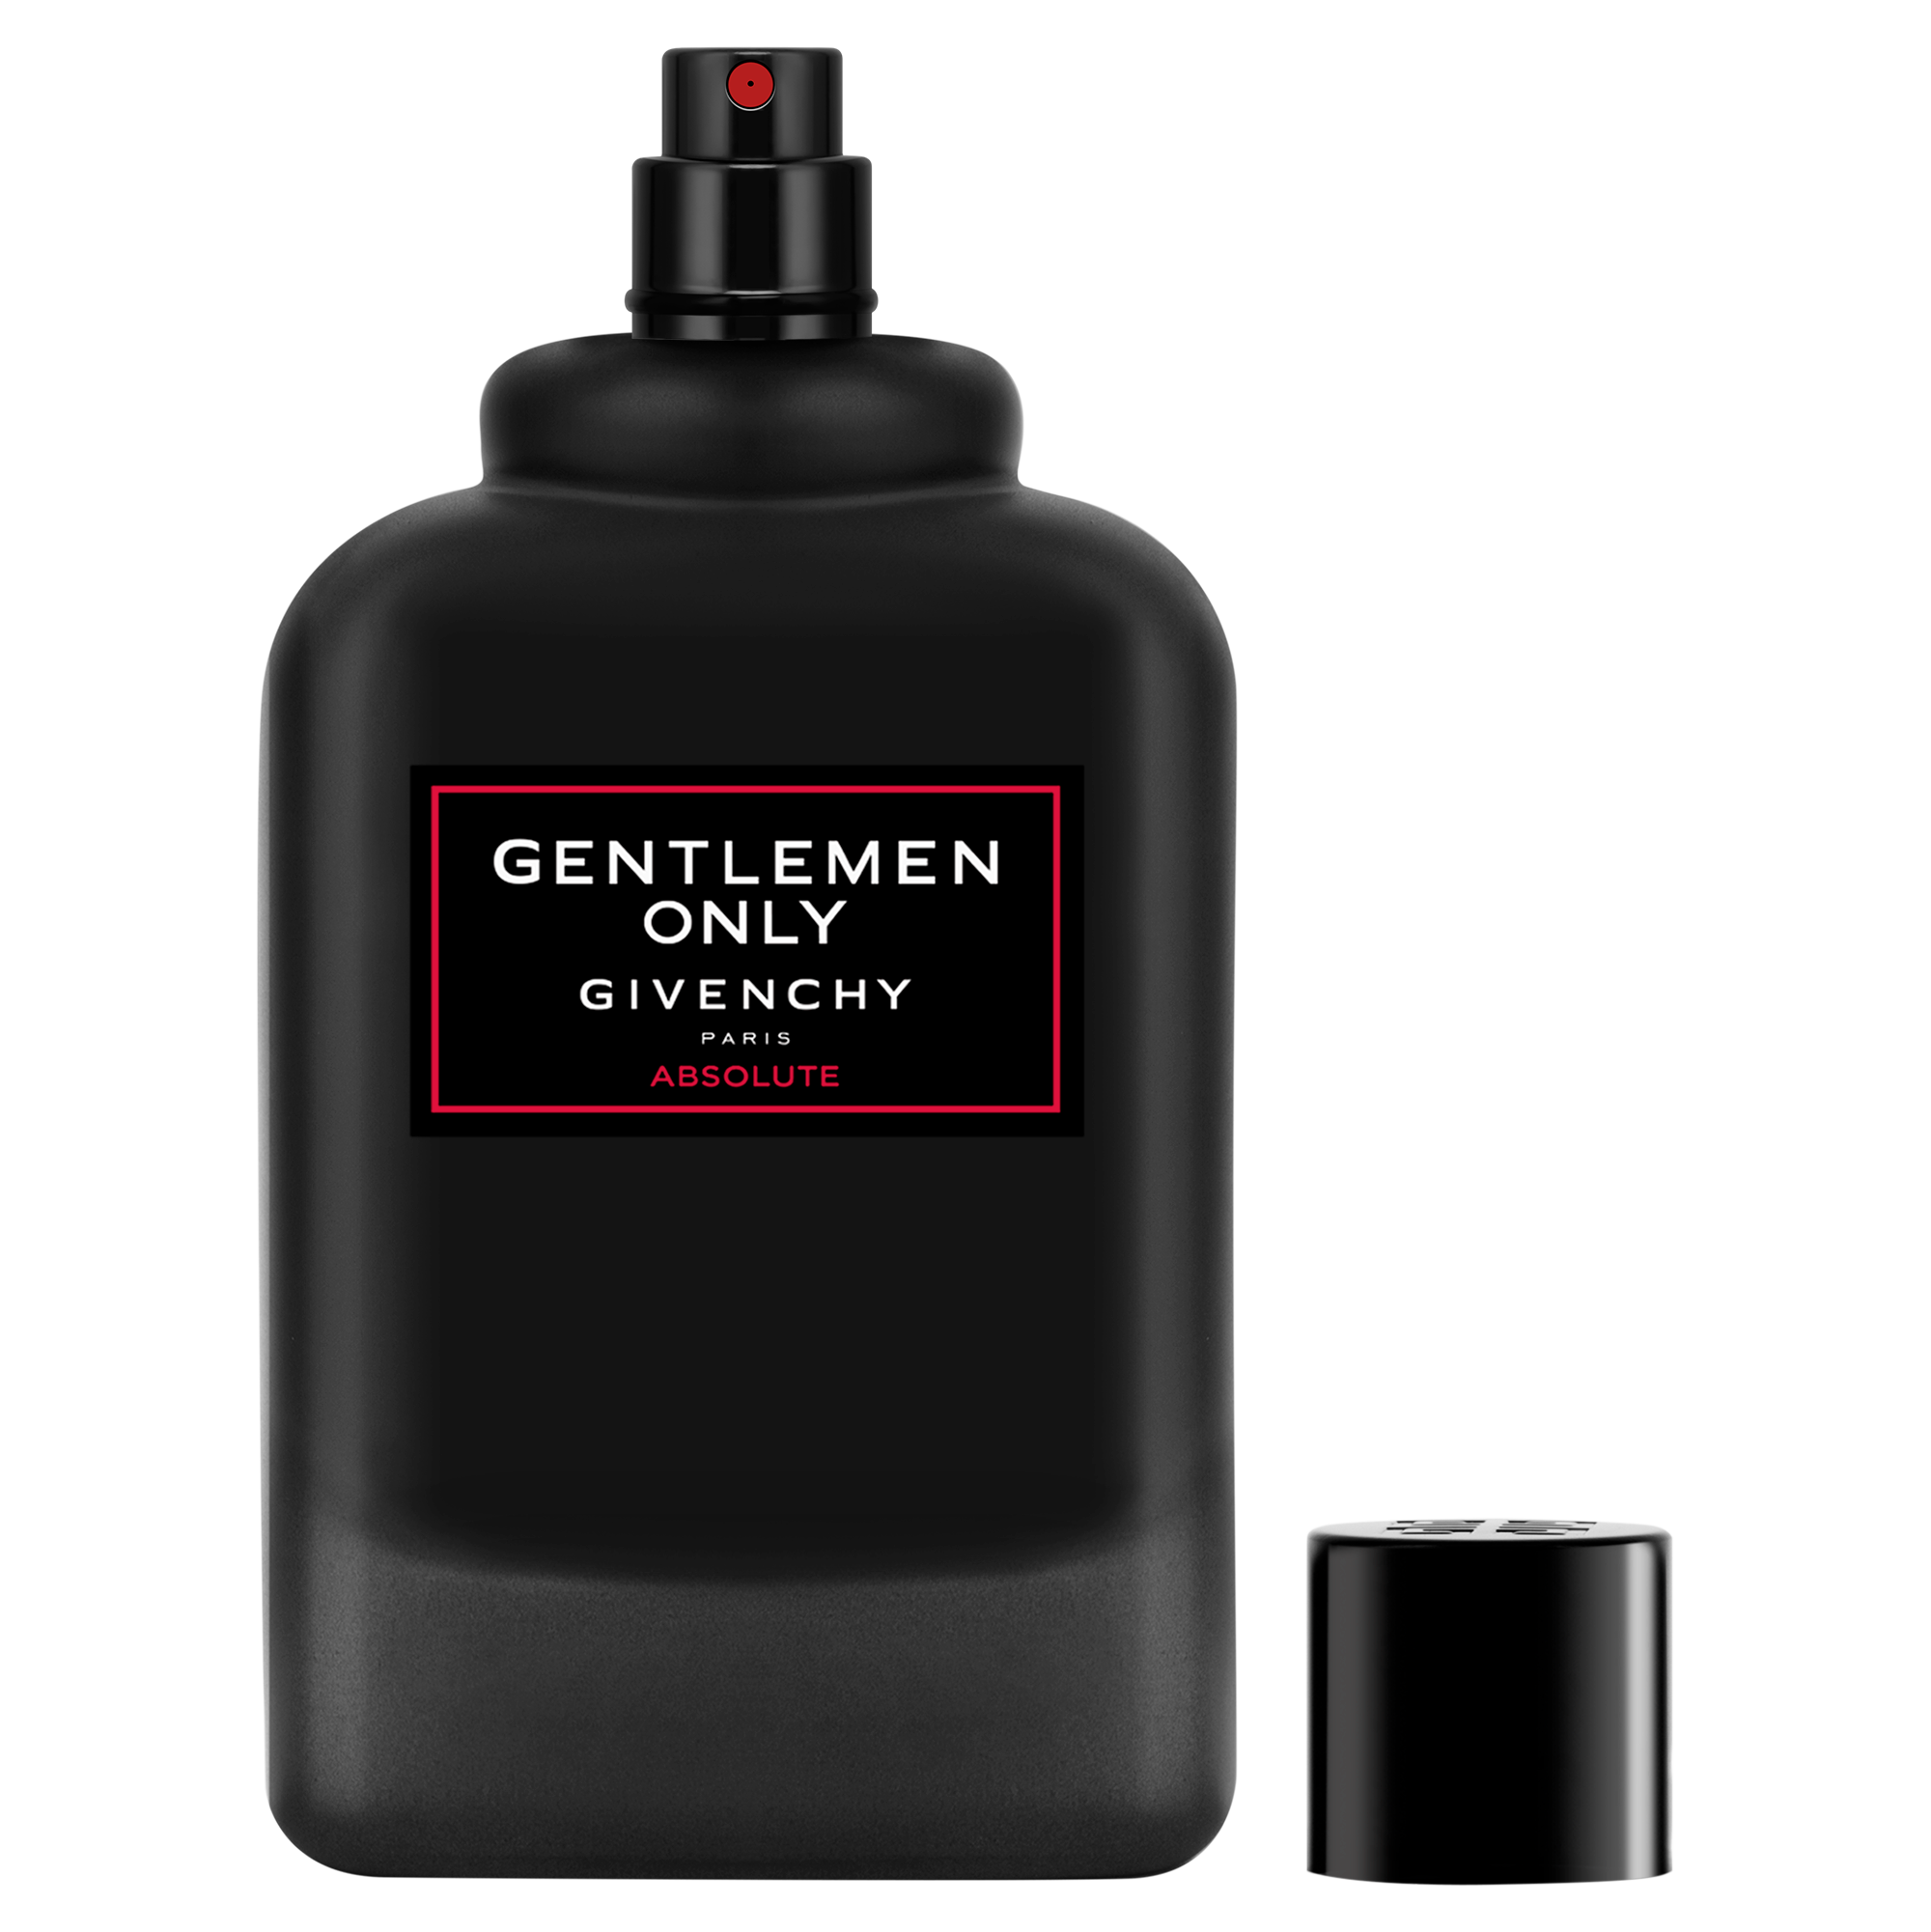 Givenchy Gentlemen only absolute. Absolut Gentleman only absolute Givenchy. Givenchy Gentlemen only Eau de Toilette. Givenchy Gentleman absolute.